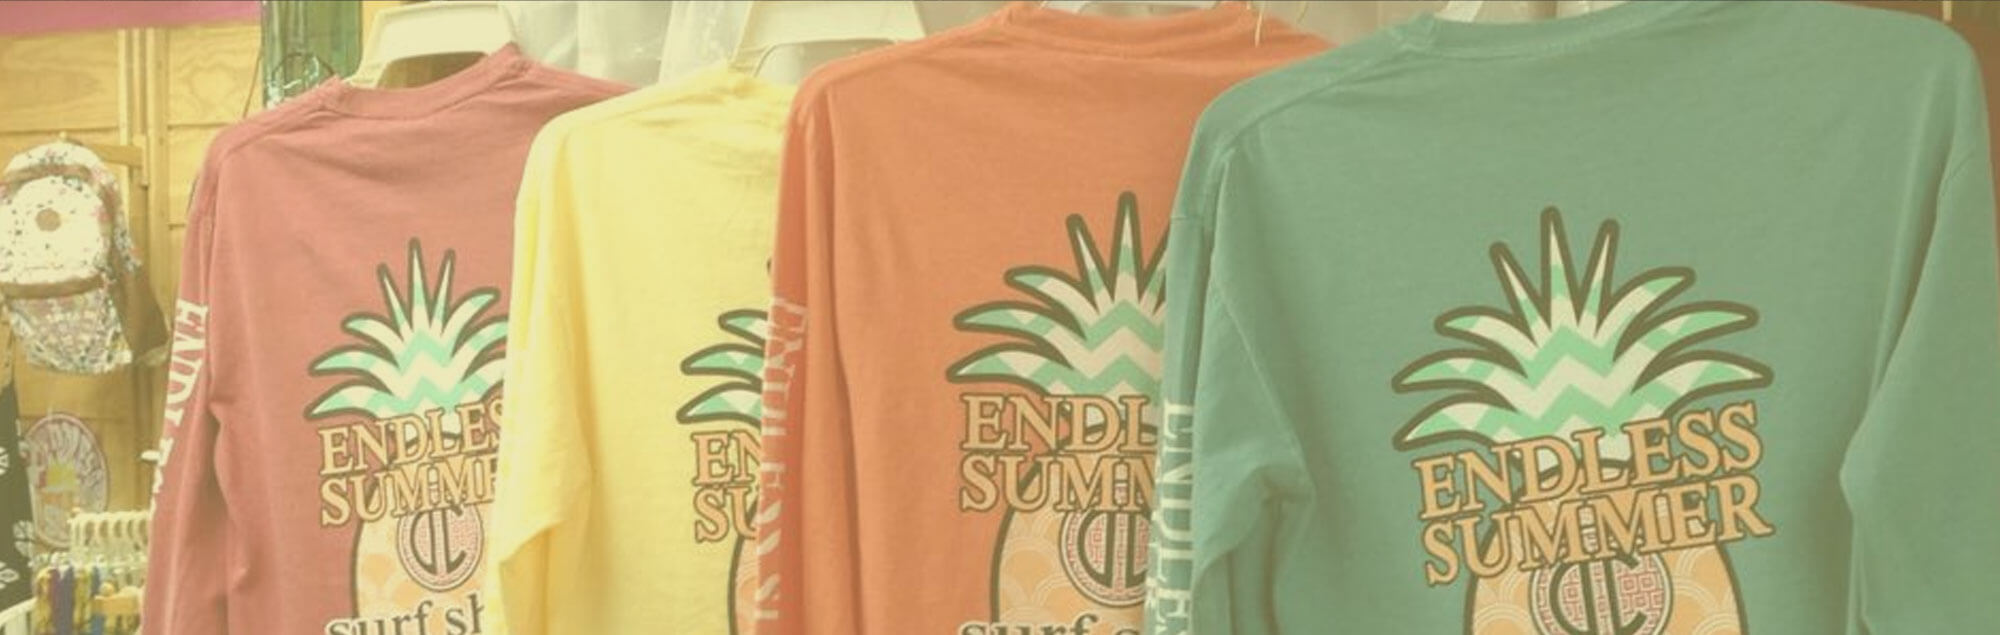 long sleeve shirts hanging on rack with endless summer logo on the back